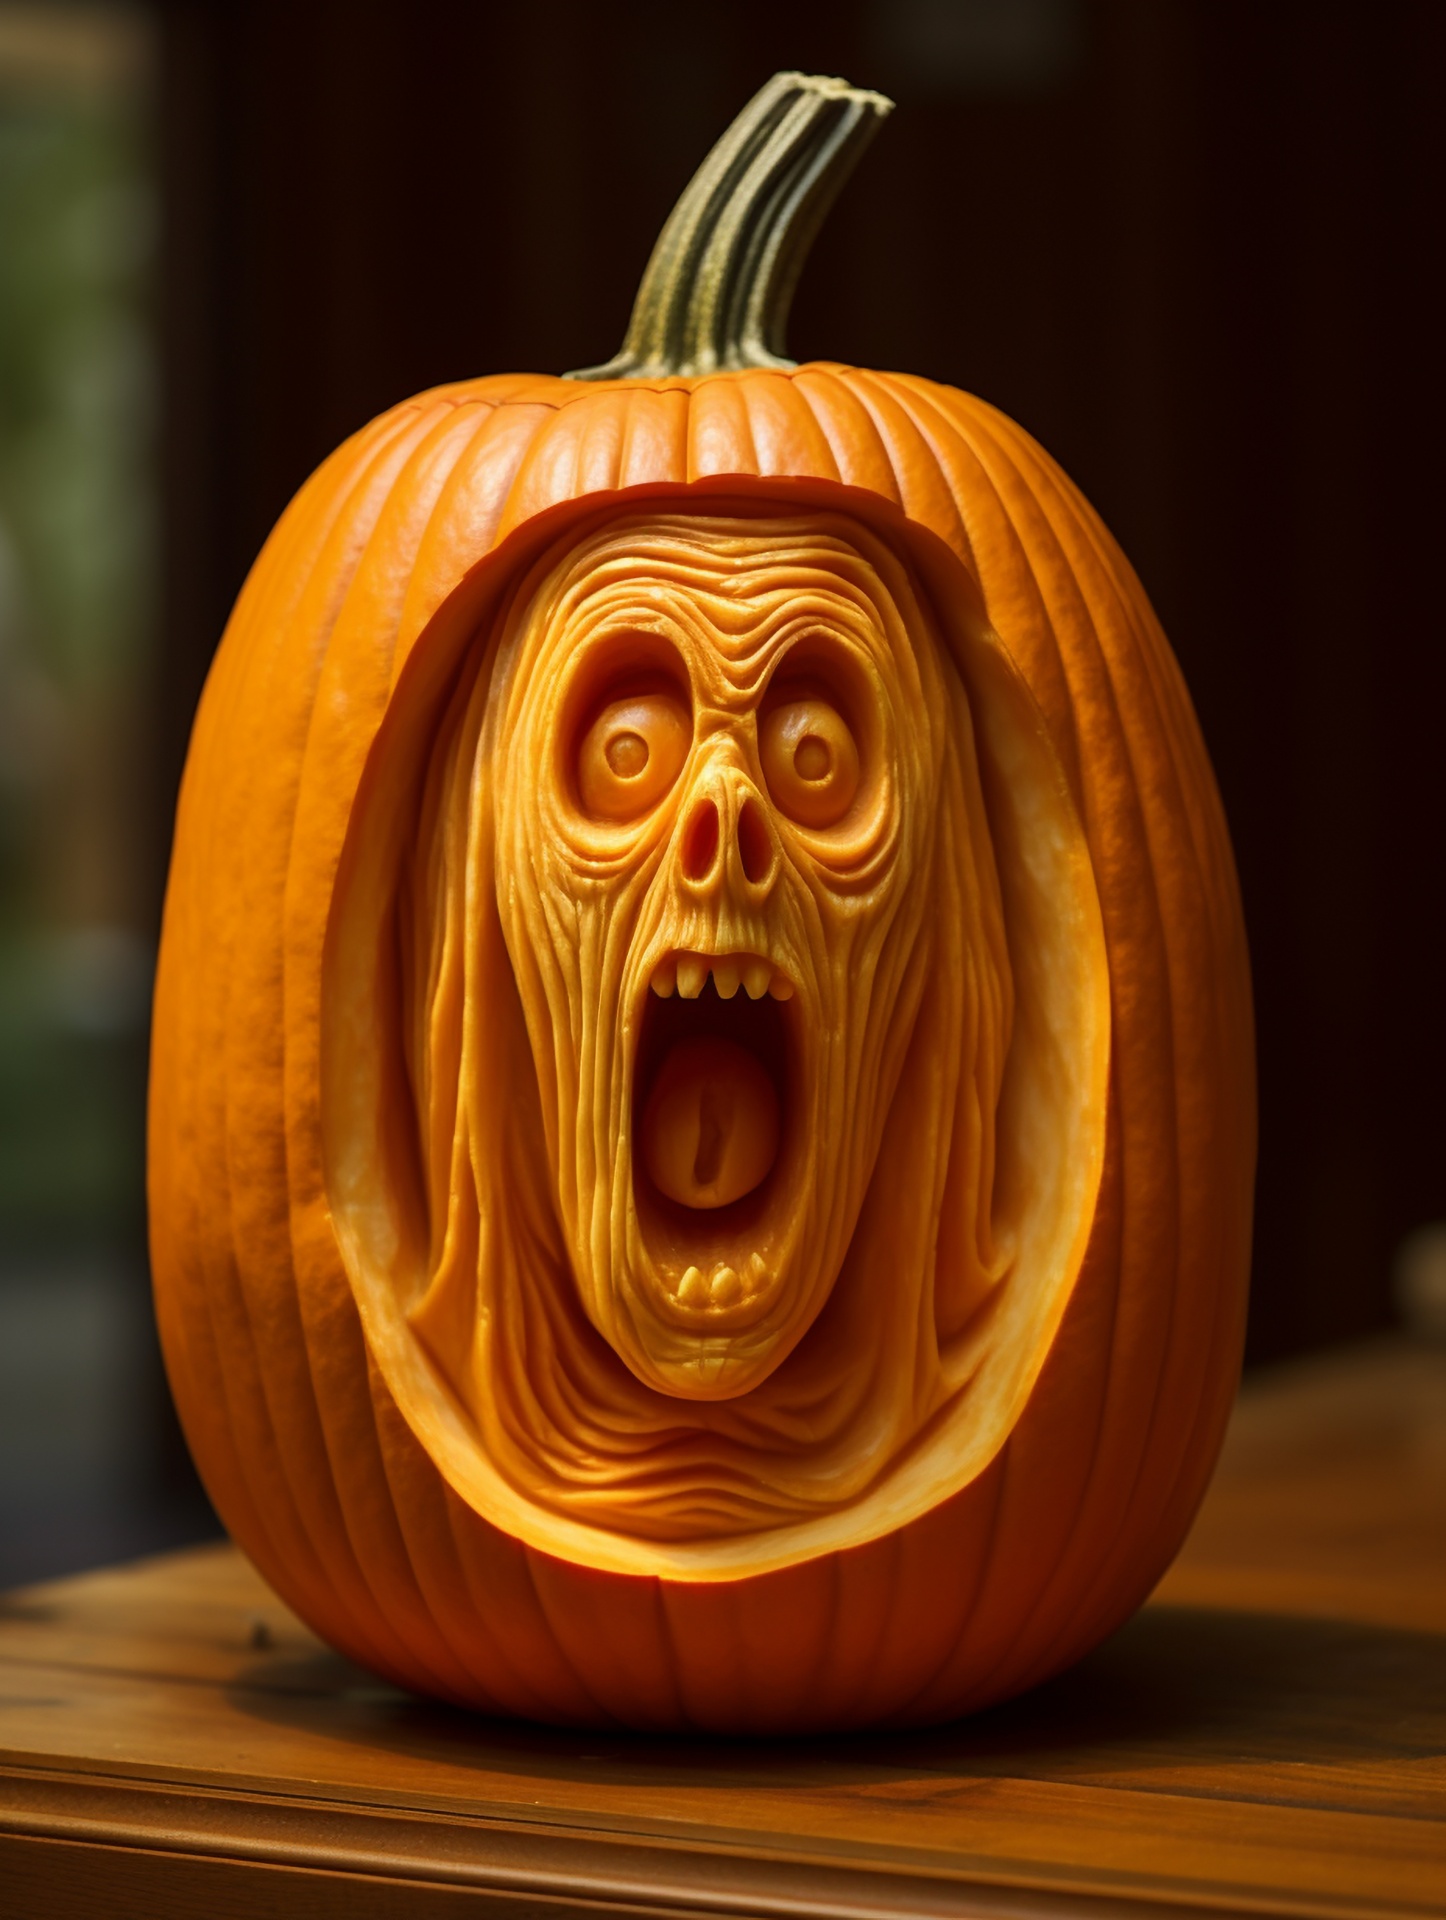 Scream Carved In A Pumpkin Free Stock Photo - Public Domain Pictures